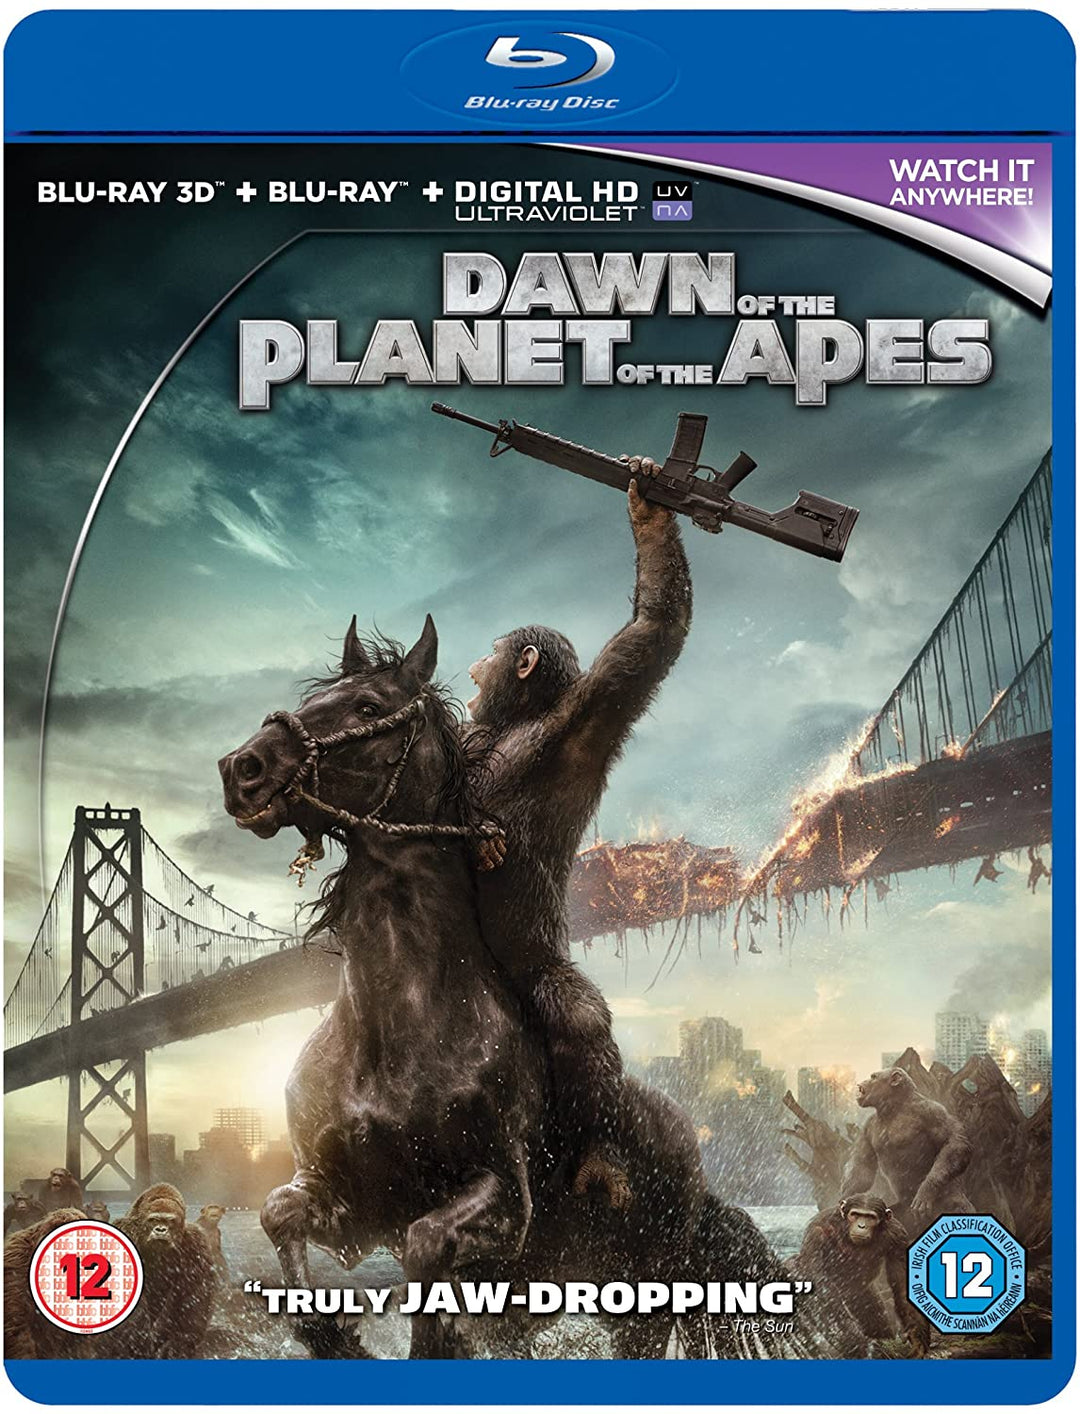 Dawn Of The Planet Of The Apes BD [2017] - Action/Adventure [Blu-Ray]